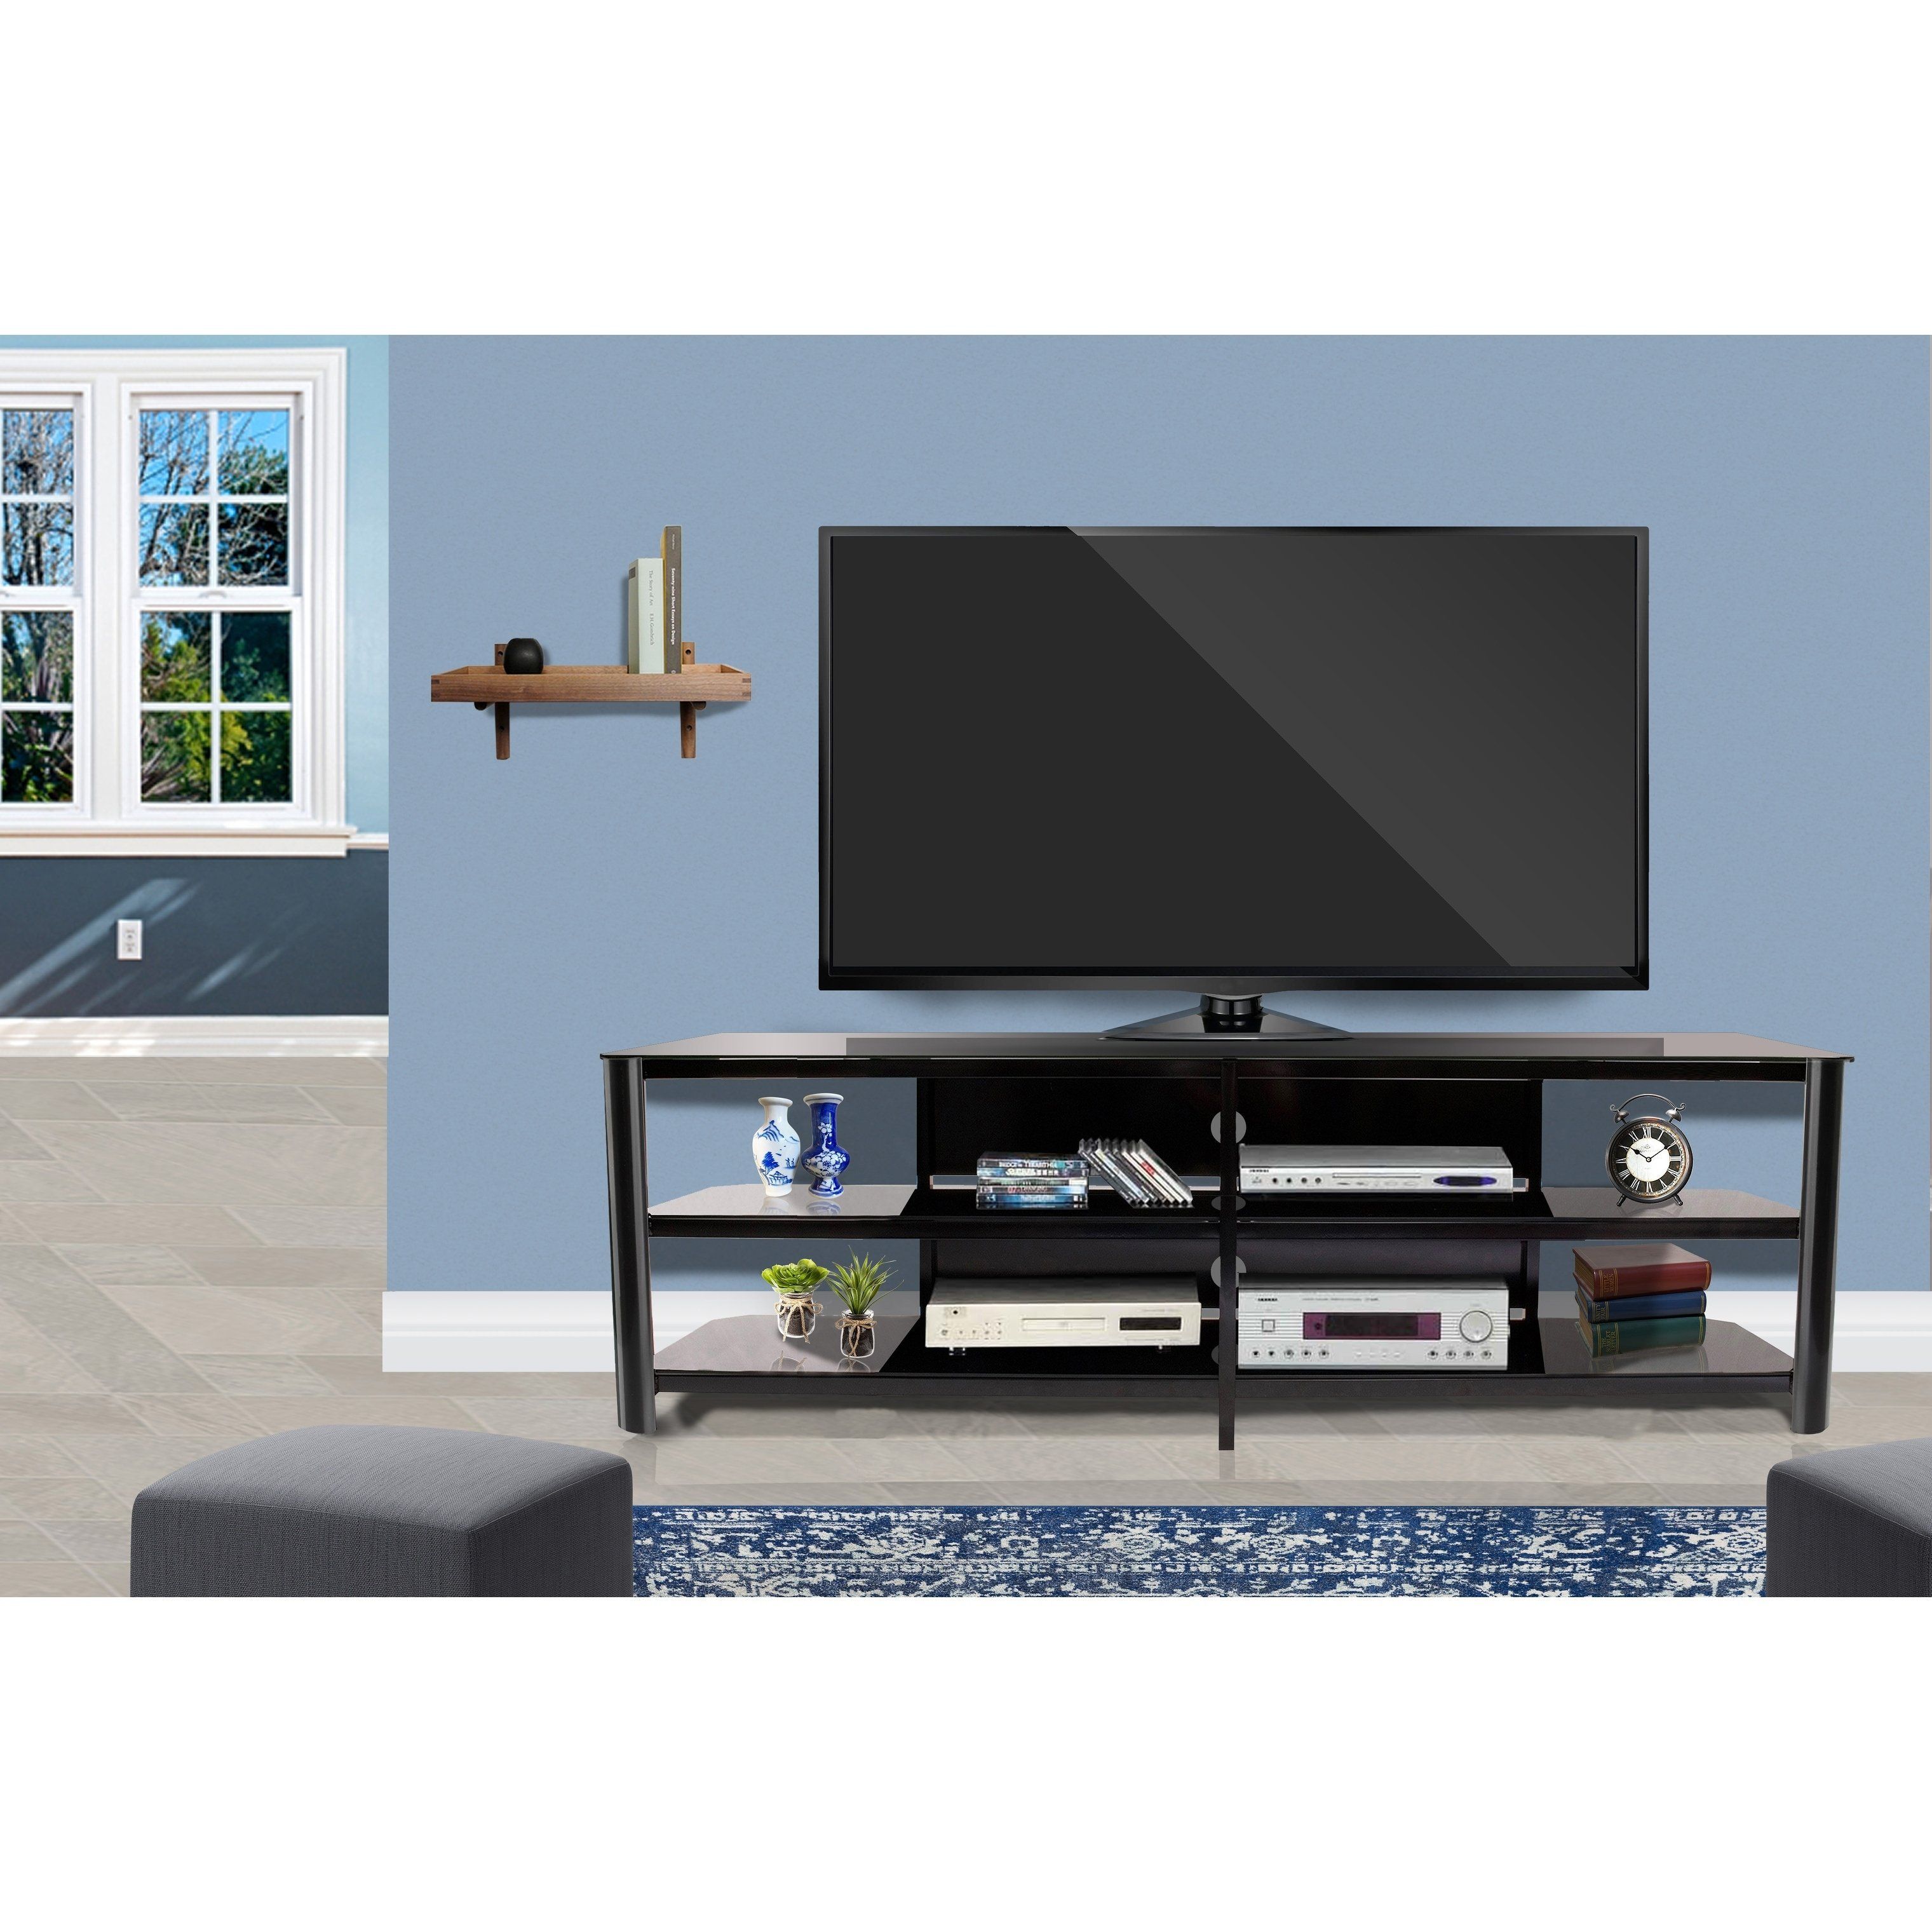 Shop Fold 'n' Snap Oxford Ez Black Innovex Tv Stand – Free Shipping Within Oxford 84 Inch Tv Stands (View 7 of 30)